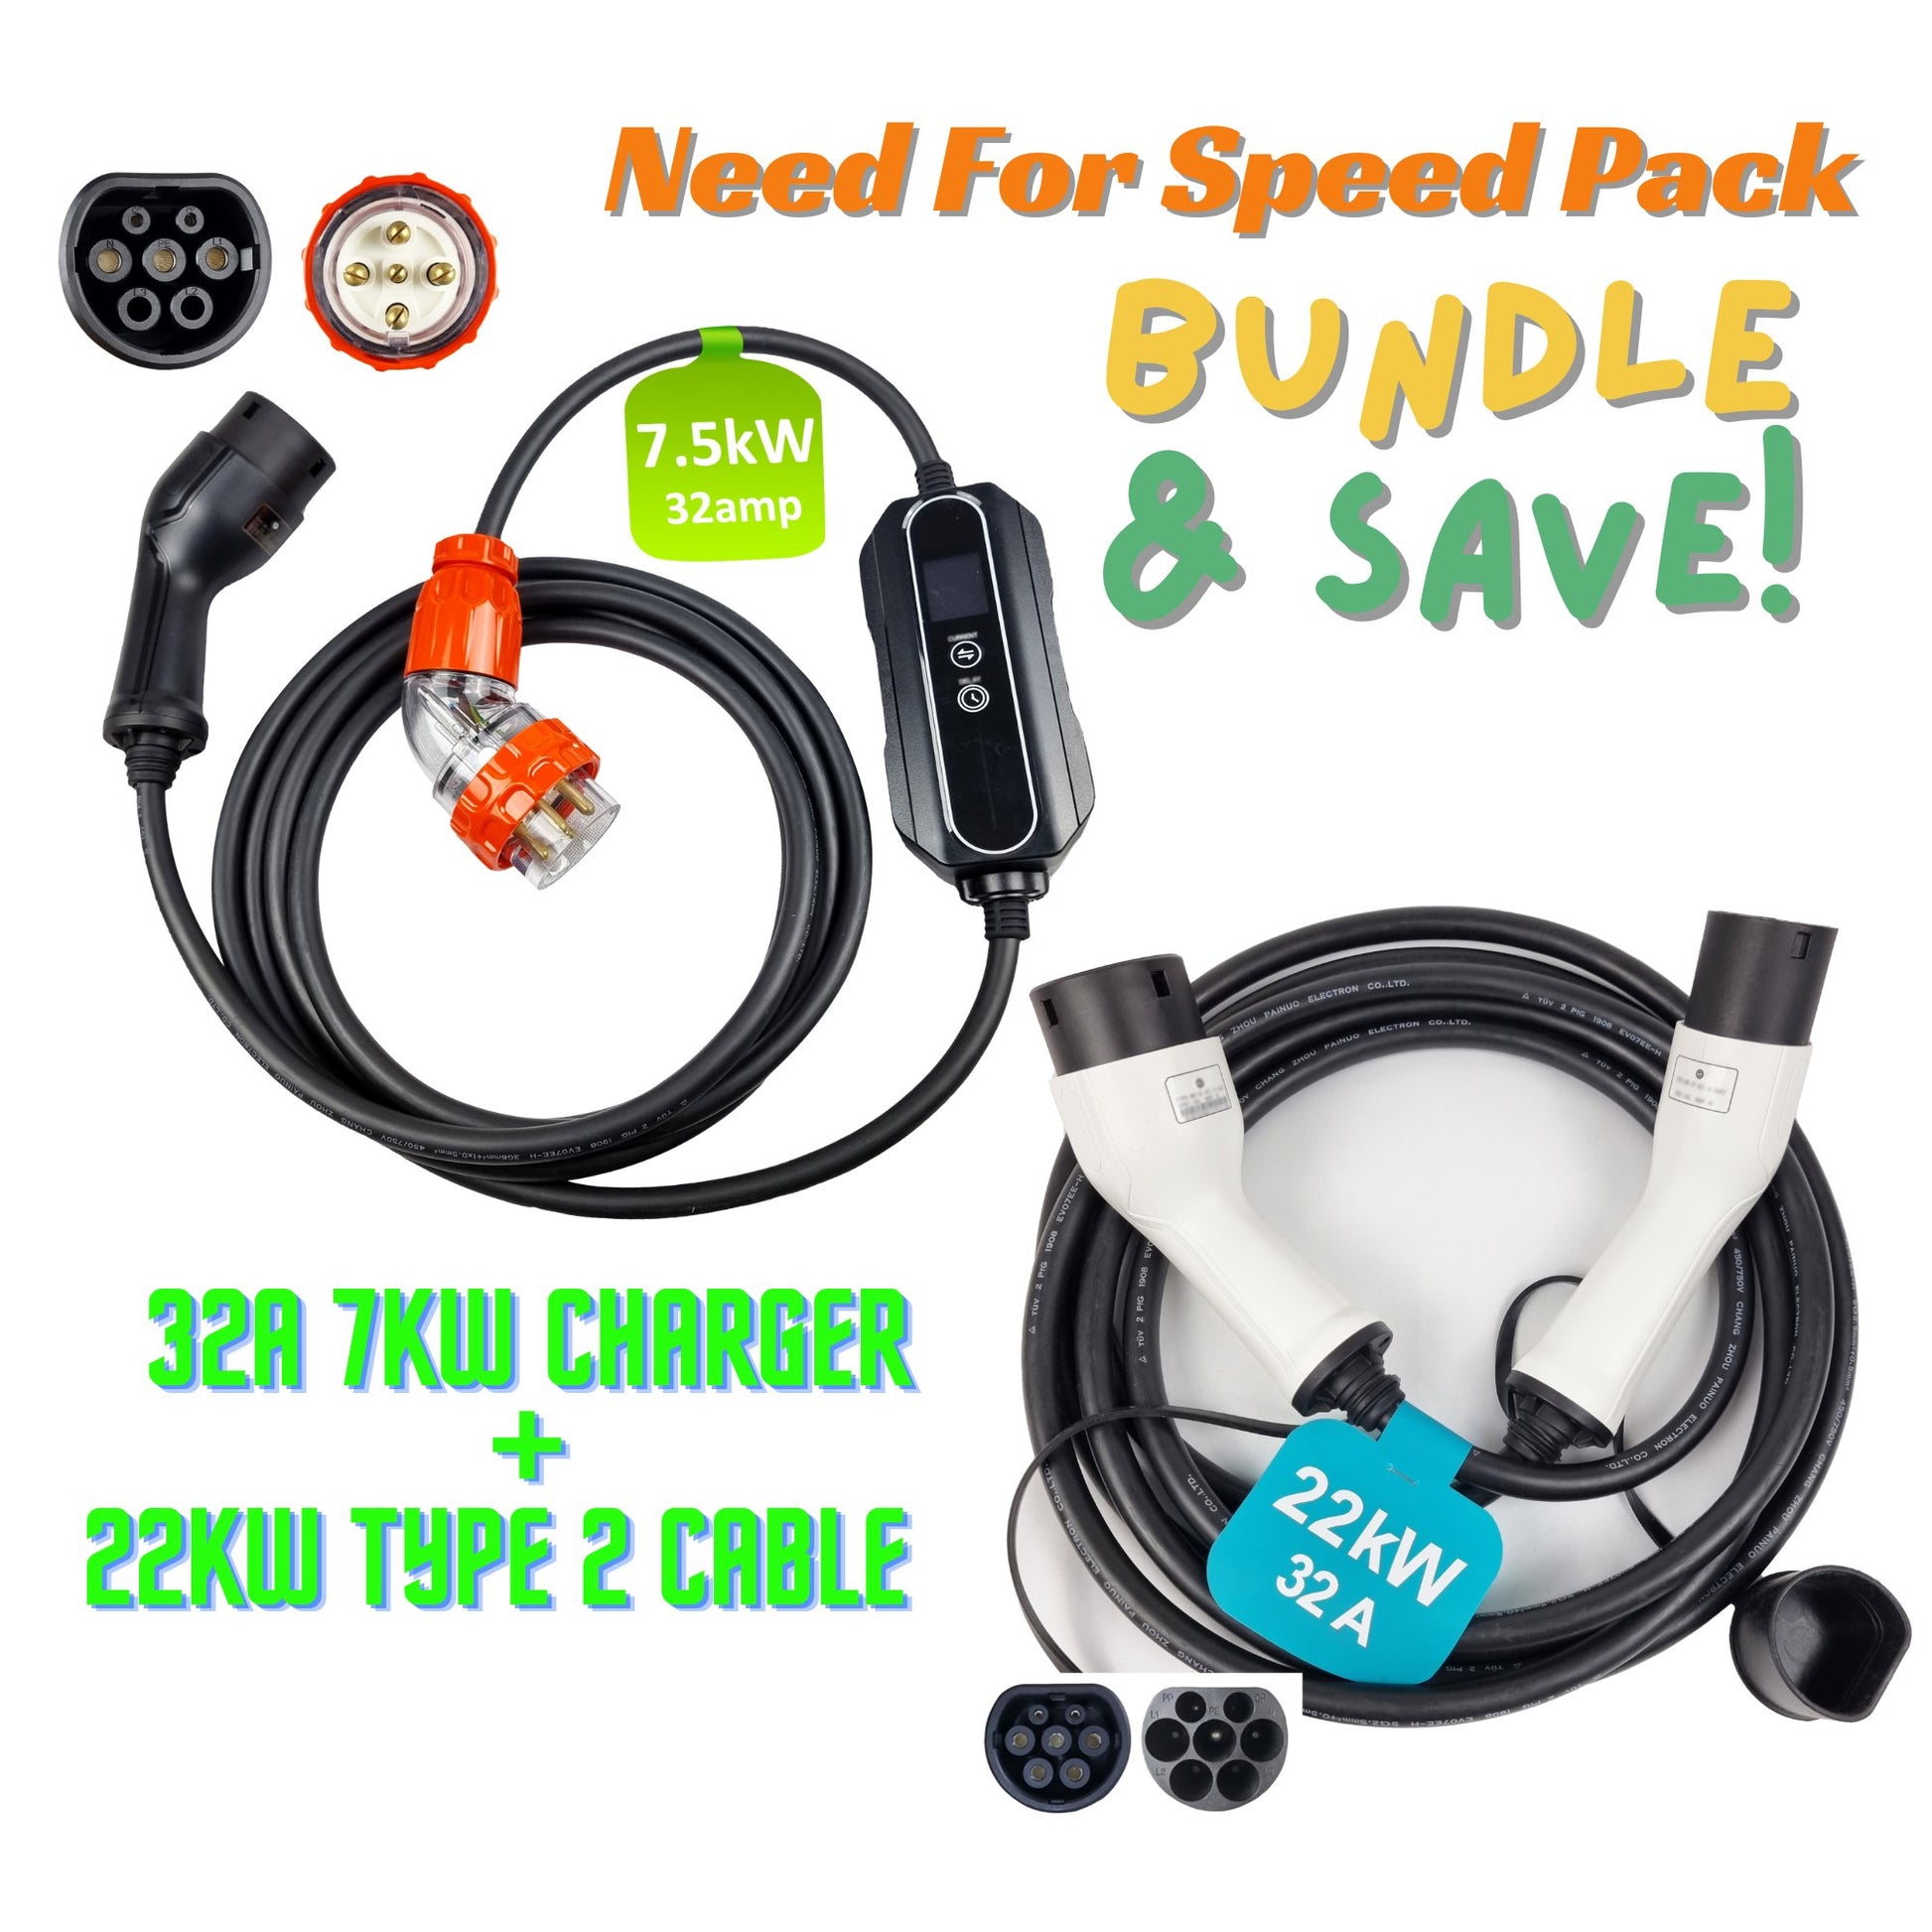 INCHARGEx Need For Speed Bundle 7kW 32A Charger & 22kW Type 2 Cable - INCHARGEx